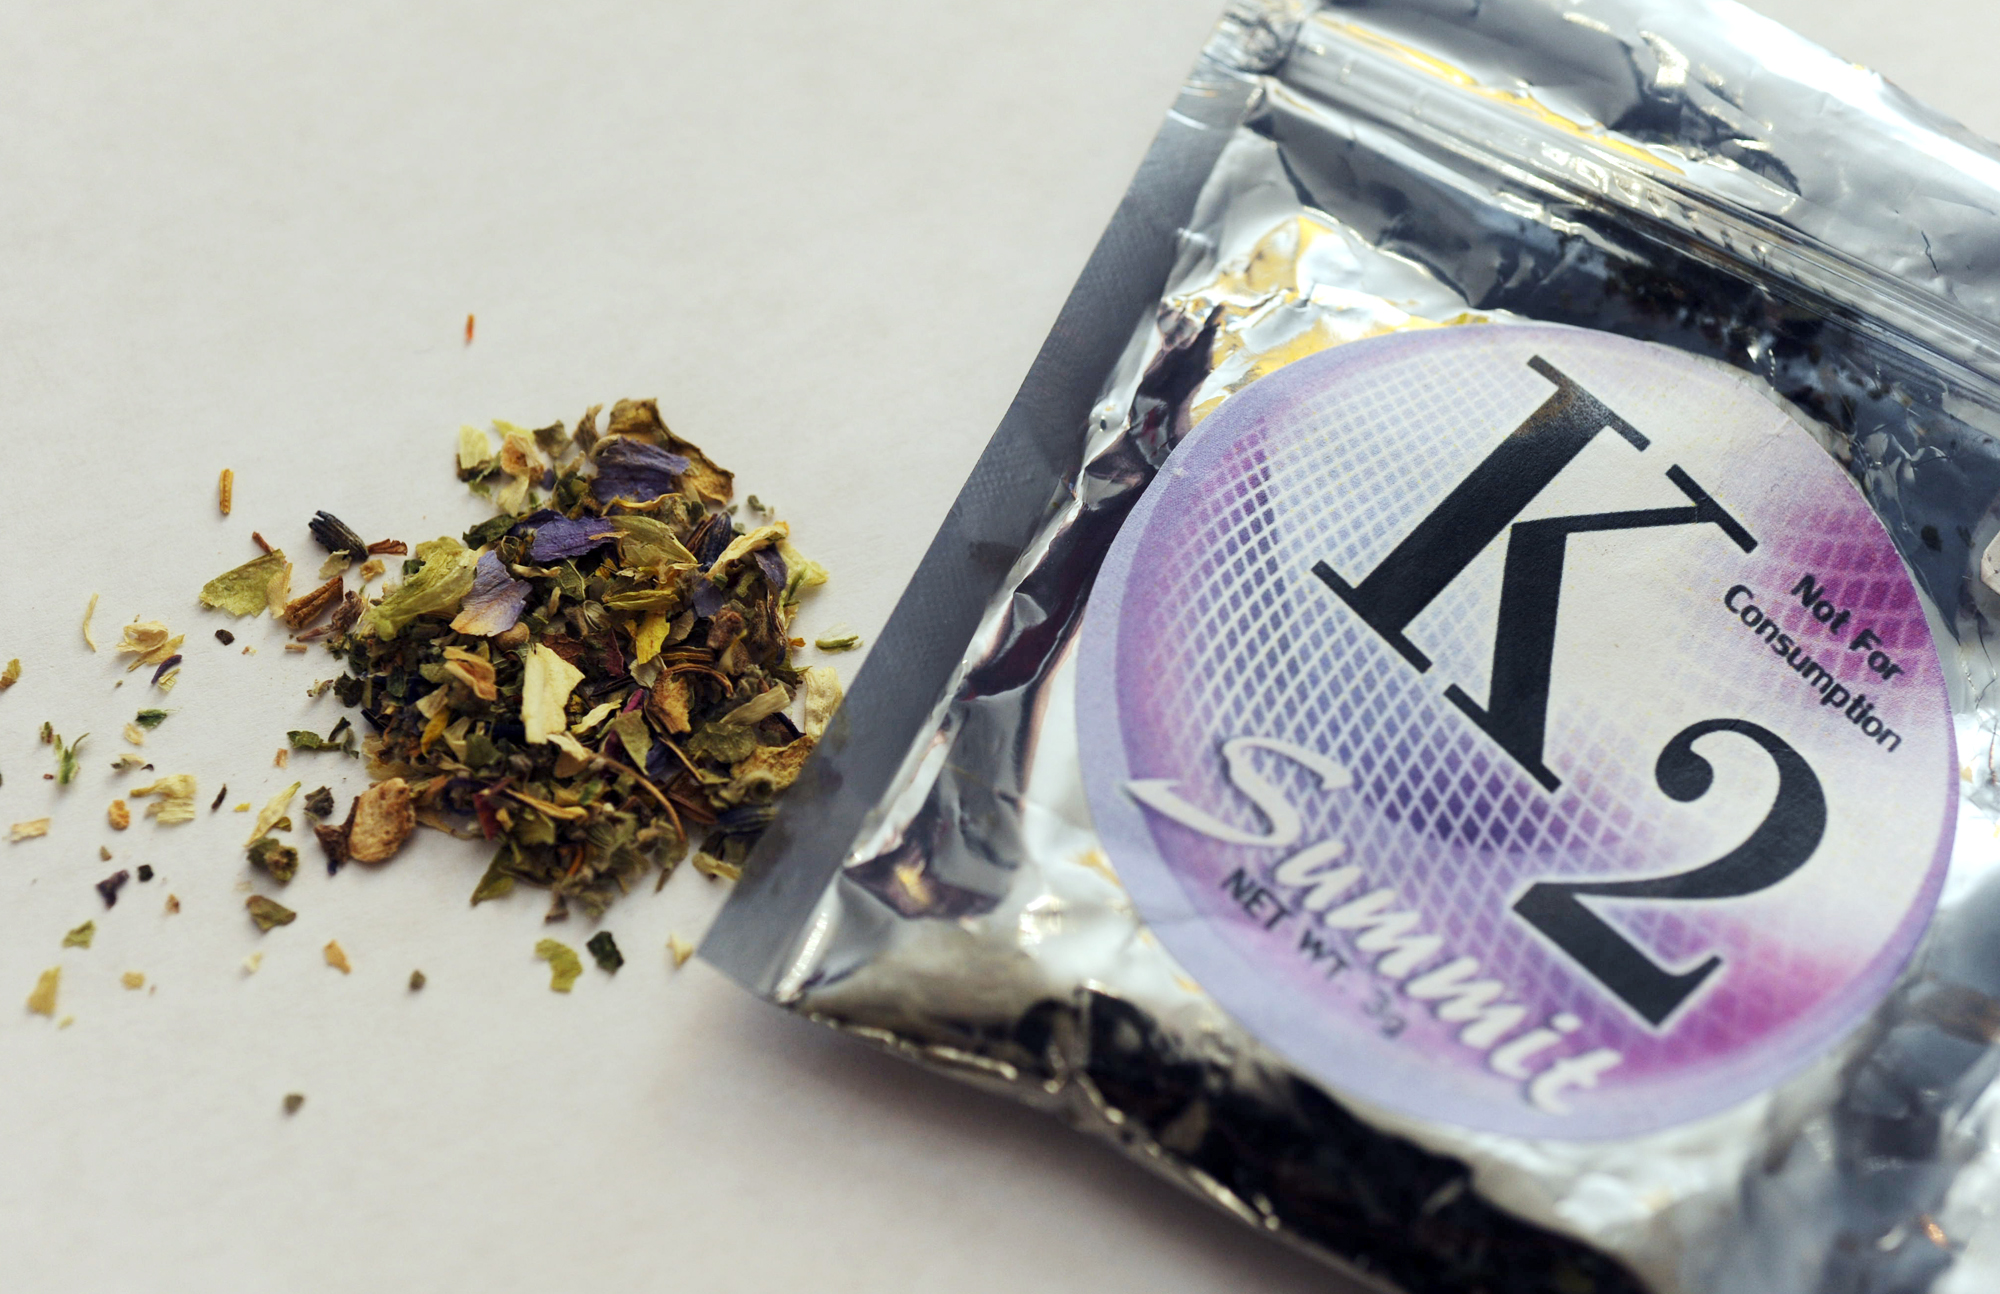 A package of K2 , a concoction of dried herbs sprayed with chemicals (Kelley McCall—AP)